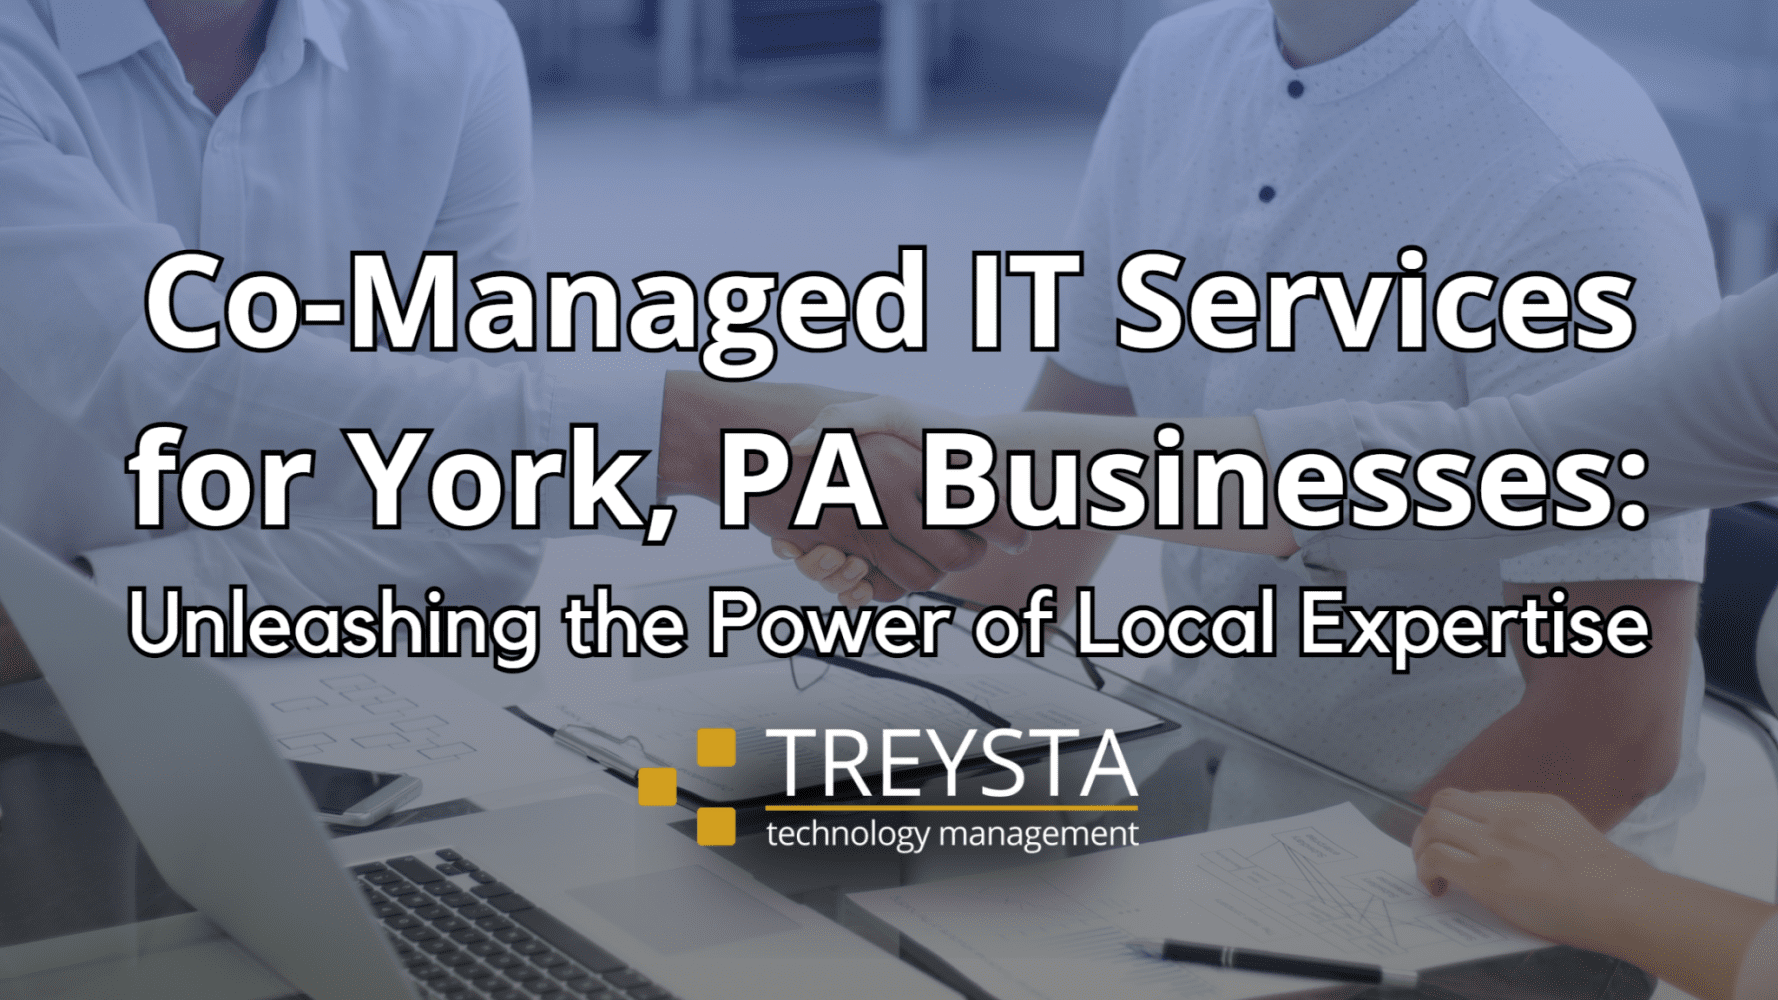 Co-Managed IT Services for York, PA Businesses: Unleashing the Power of Local Expertise